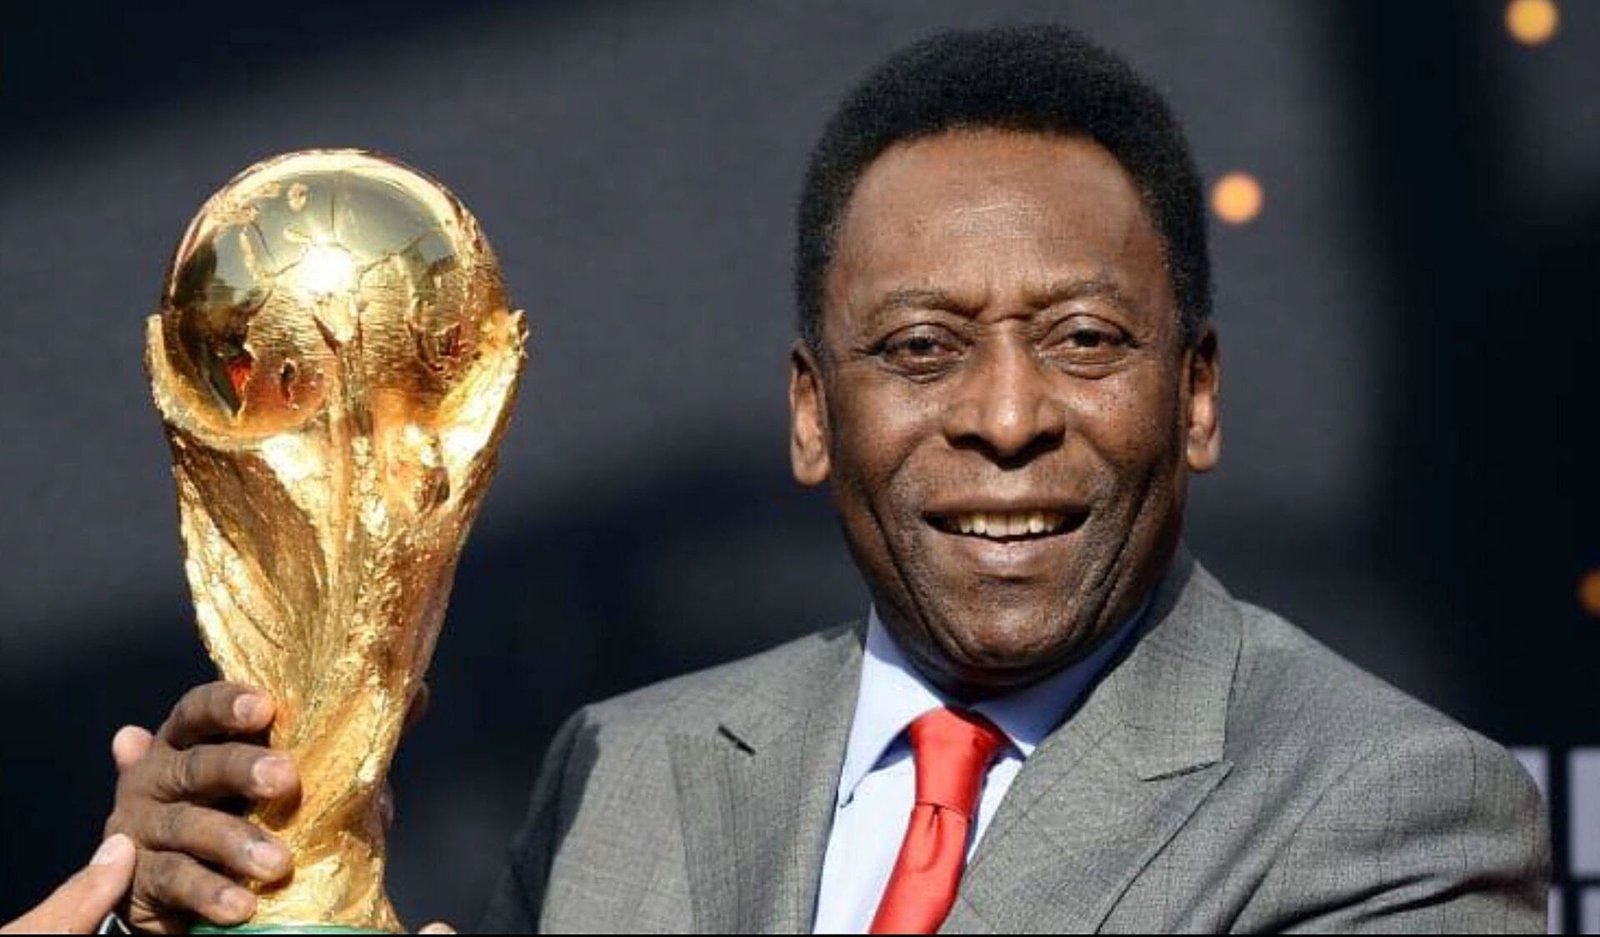 Brazil Honors Pele: Christ the Redeemer Statue Illuminated with Football Legend's Shirt on First Anniversary of His Passing